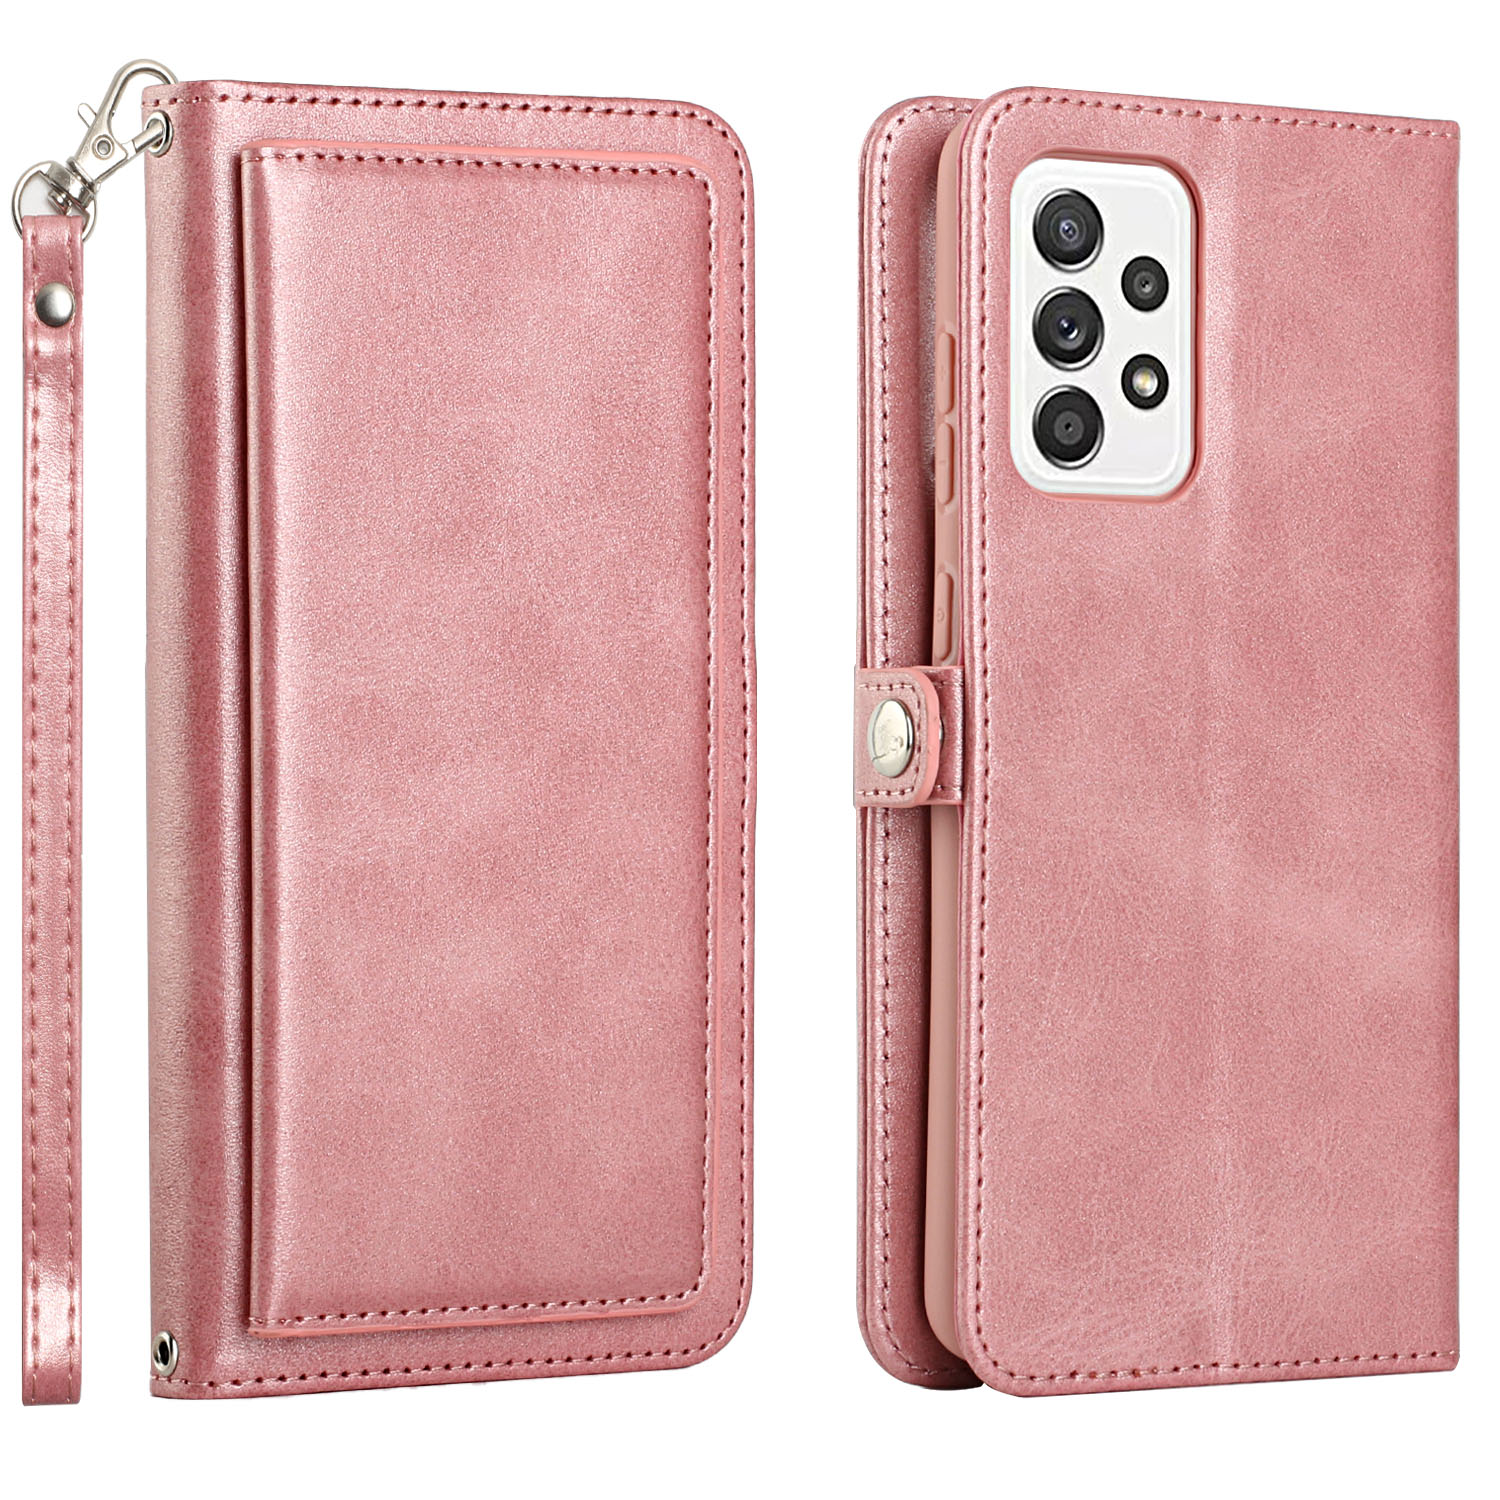 Premium PU Leather Folio WALLET Front Cover Case for Galaxy A52 5G (Rose Gold)